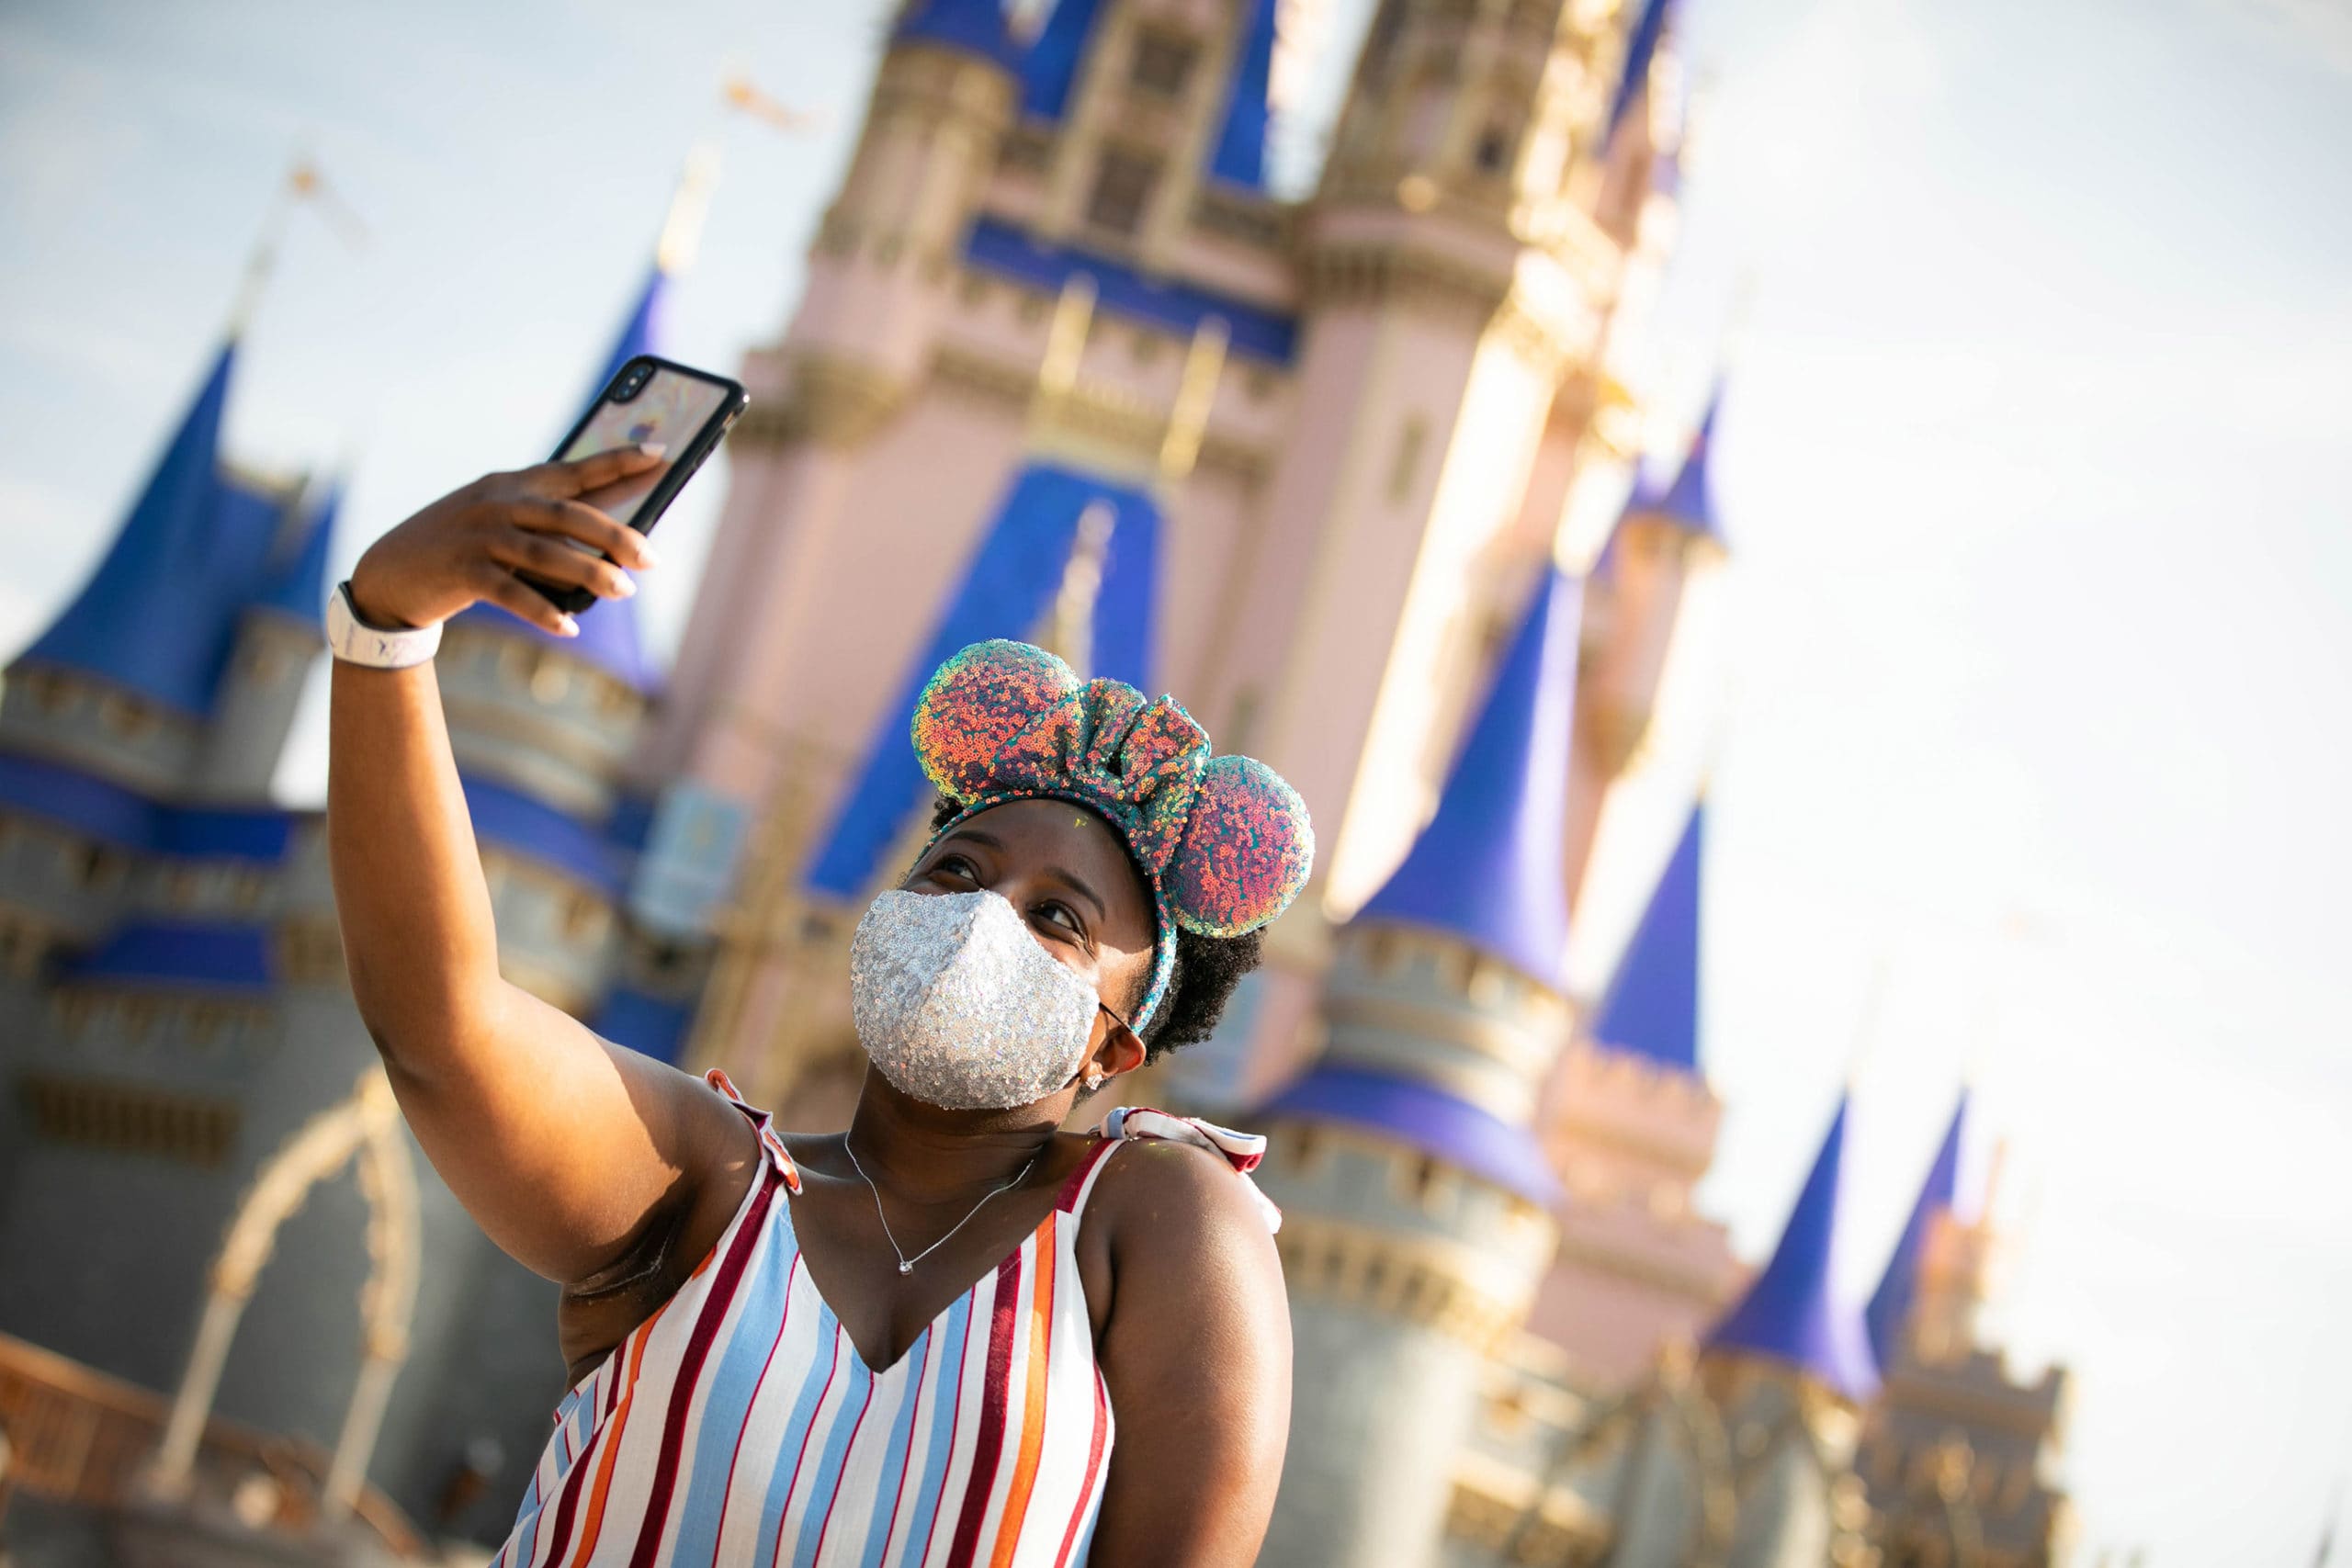 Disney's domestic theme parks will require all parkgoers to wear masks indoors starting Friday